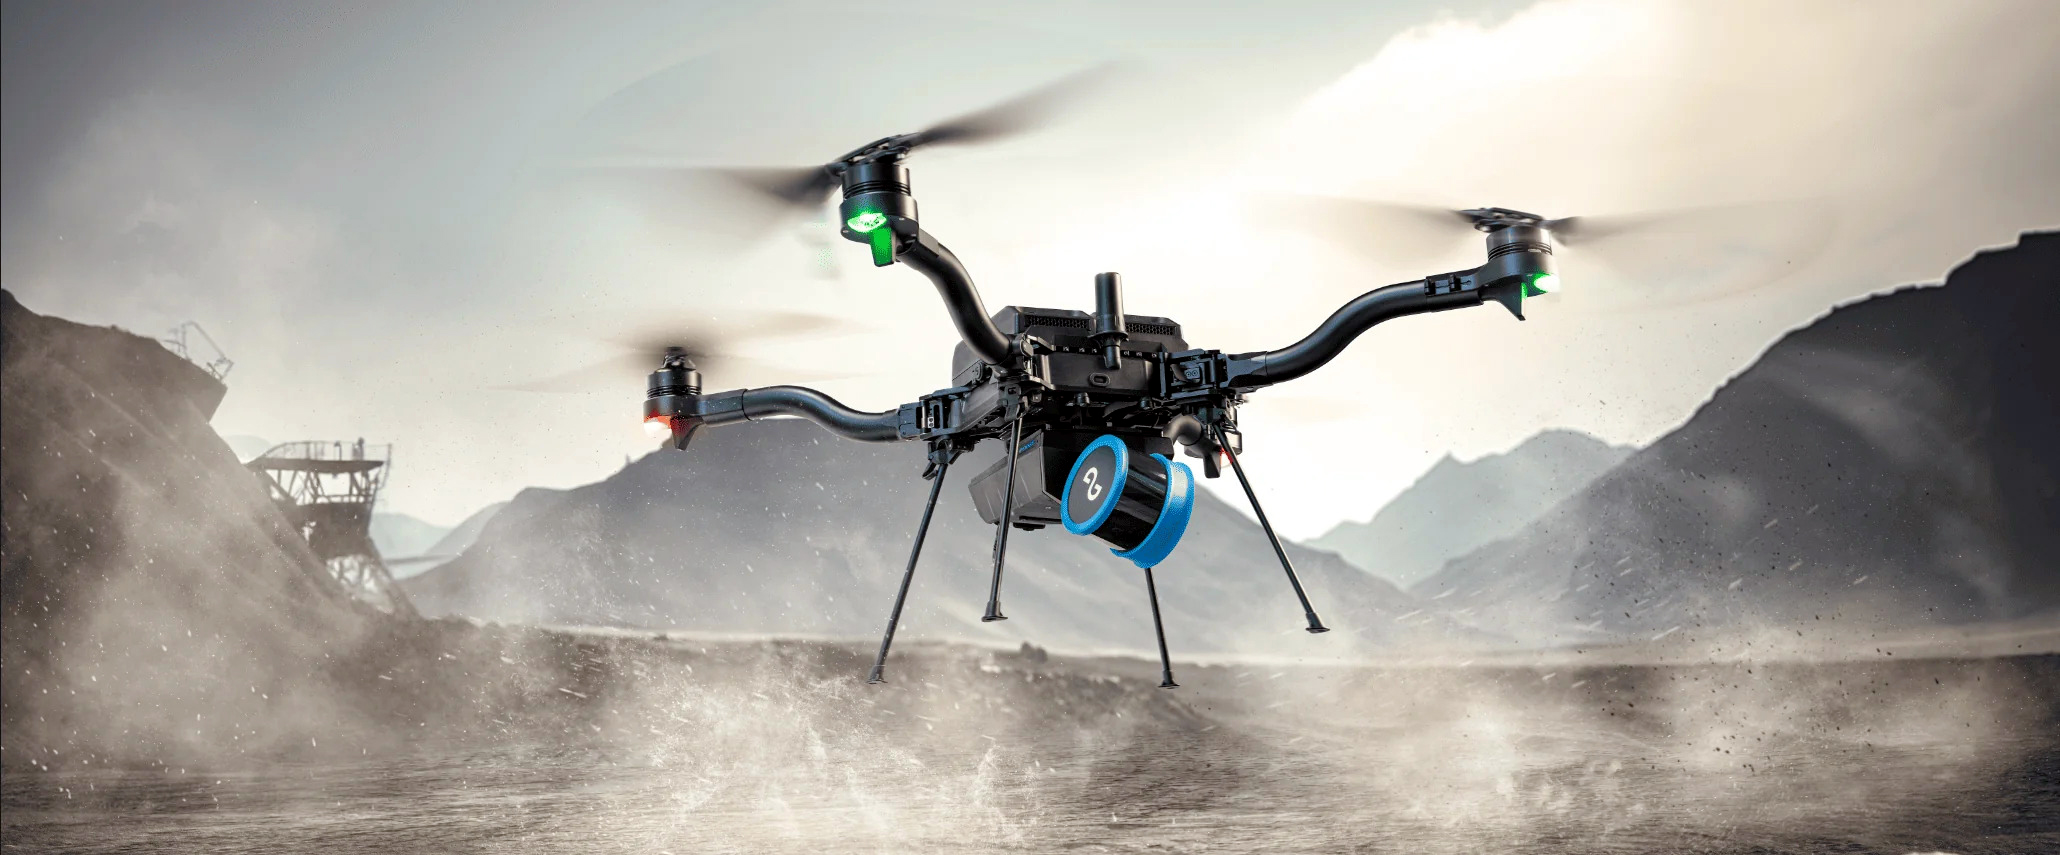 LiDAR Solution Provider Emesent Supporting US-Made Drones